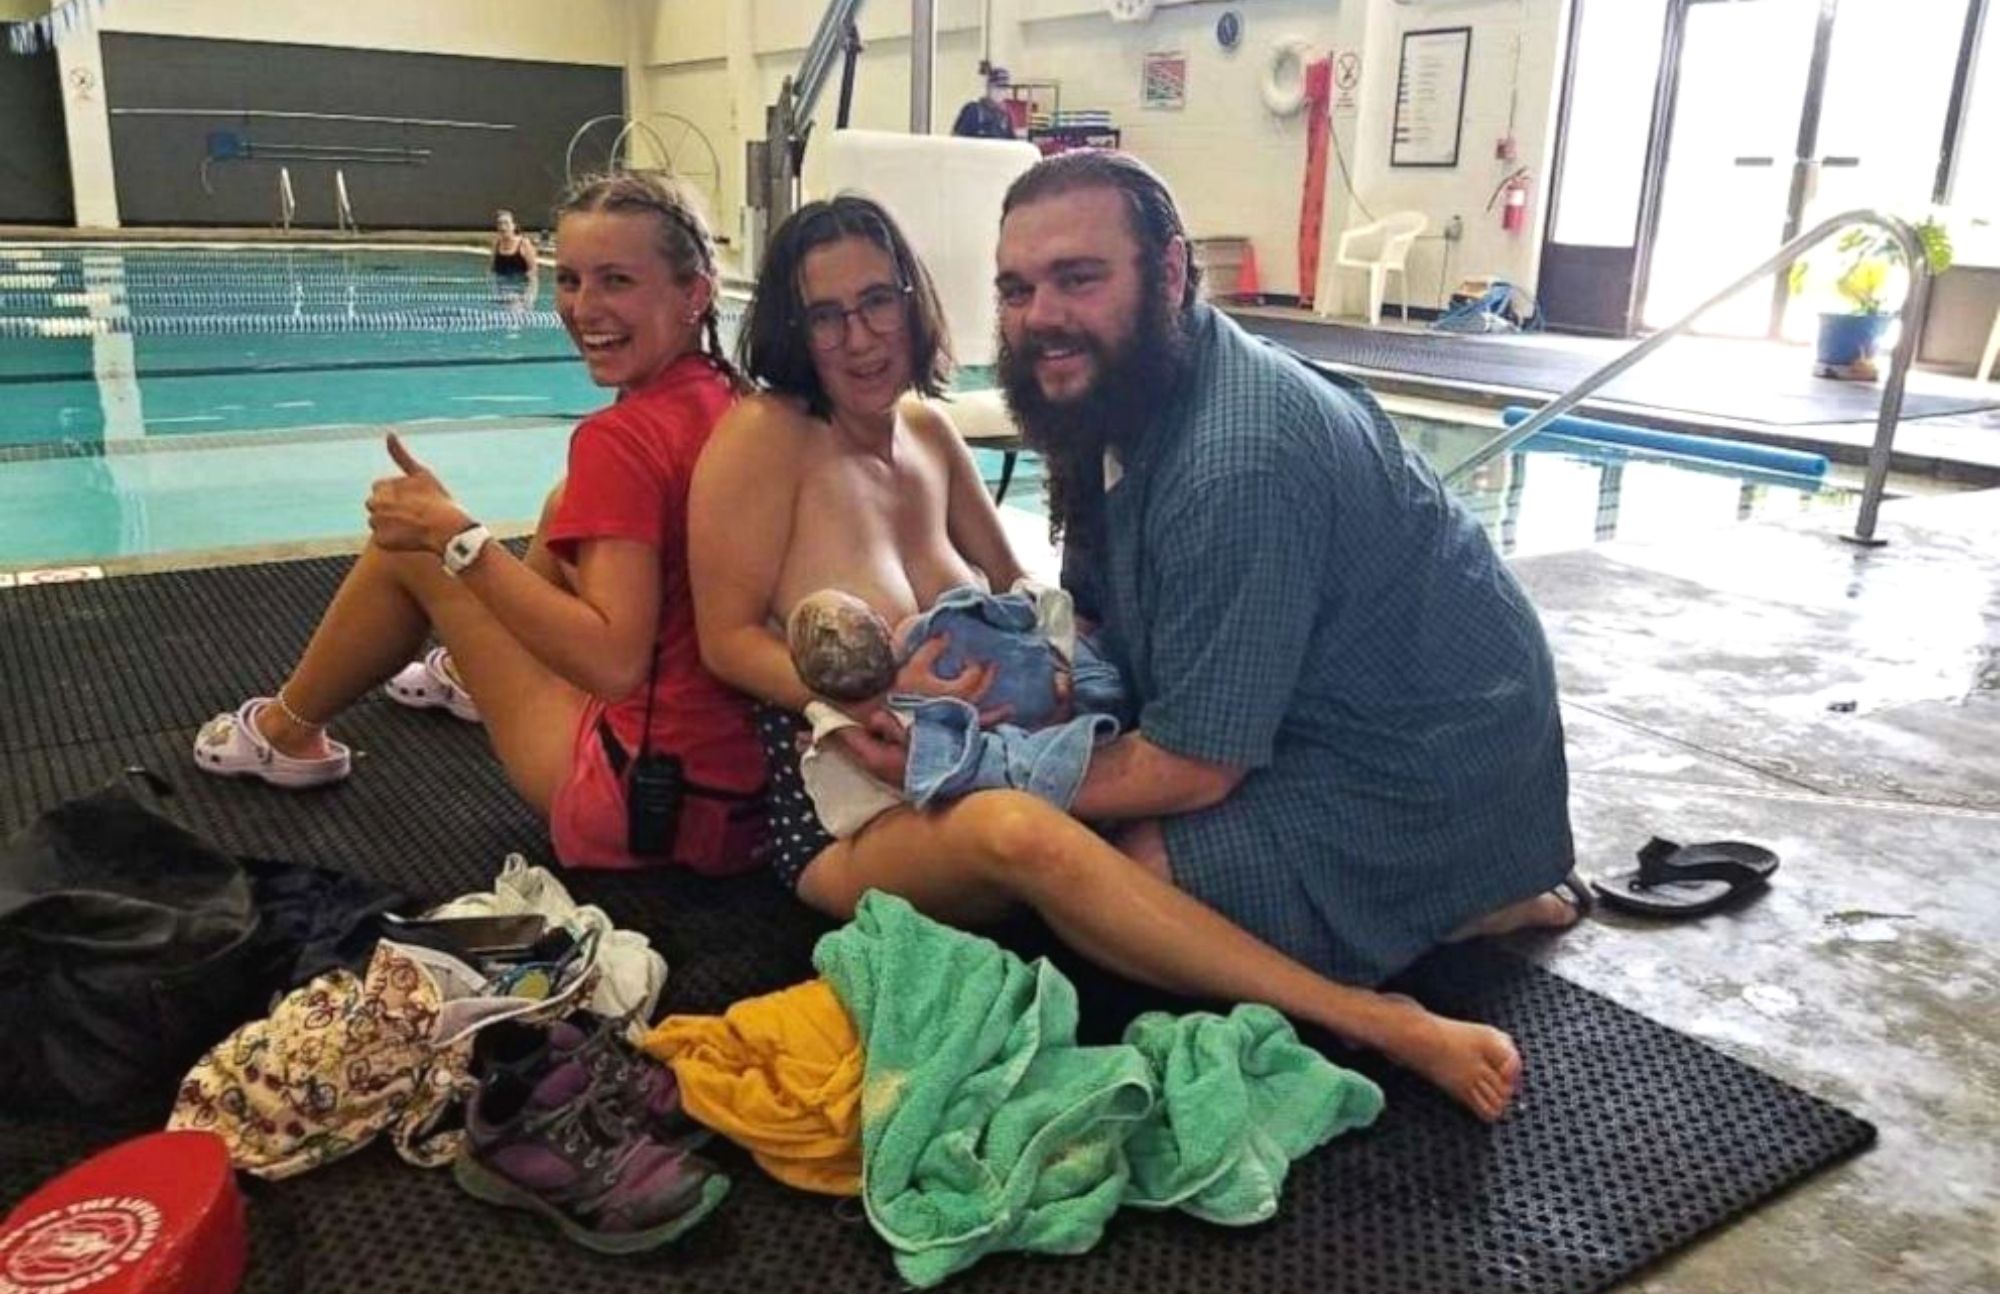 18-Year-Old Lifeguard Assists In The Delivery Of A Baby On The Pool Deck